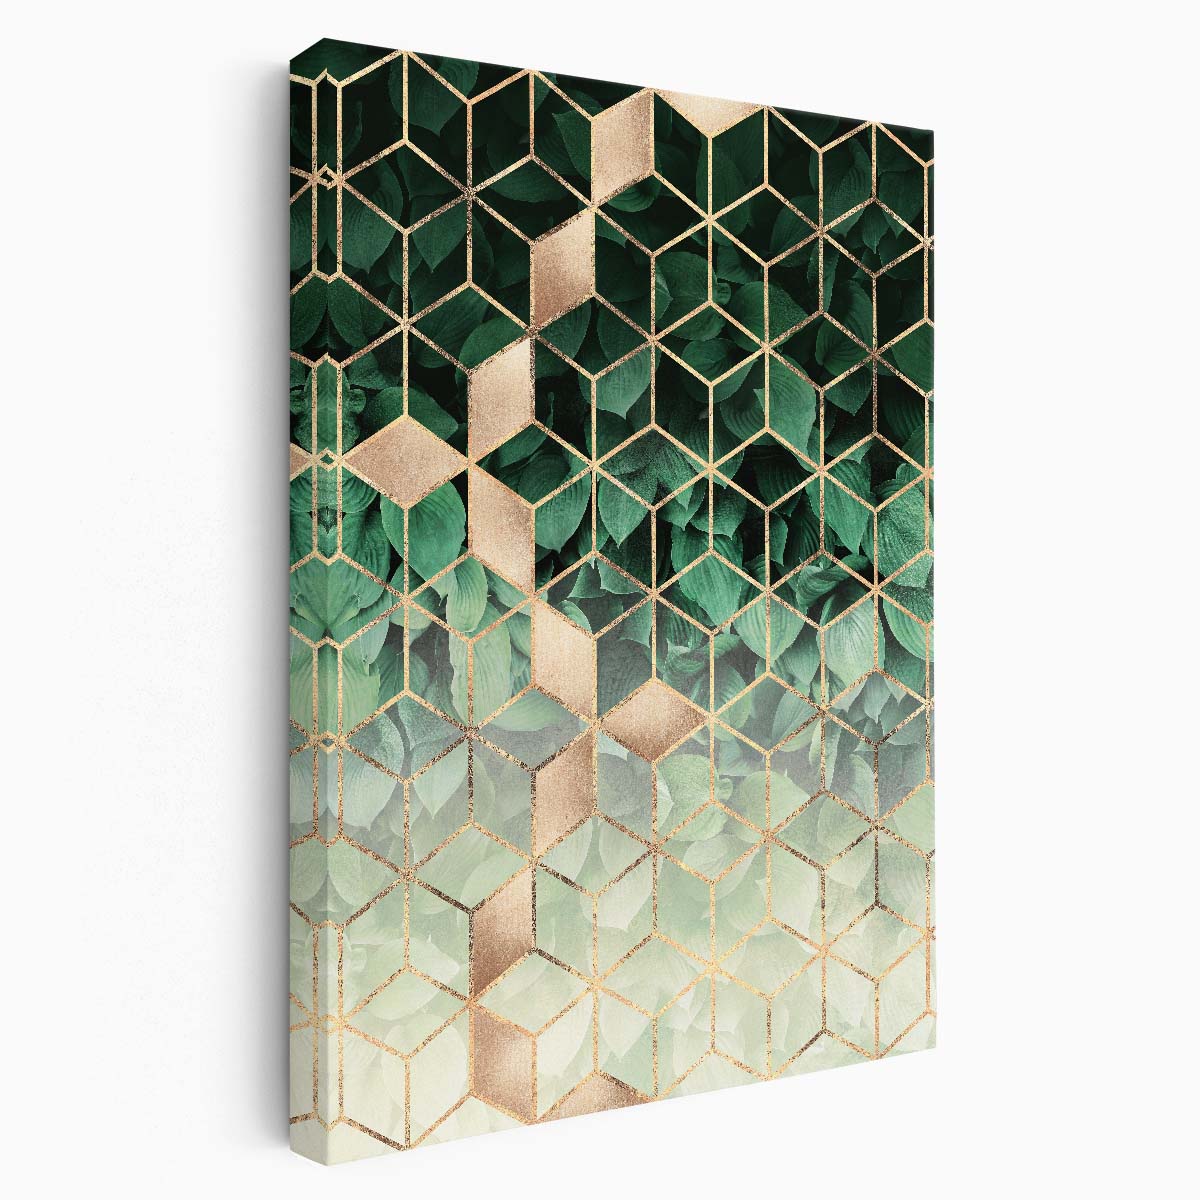 Elisabeth Fredriksson's Geometric Golden Leaf and Cube Botanical Illustration by Luxuriance Designs, made in USA